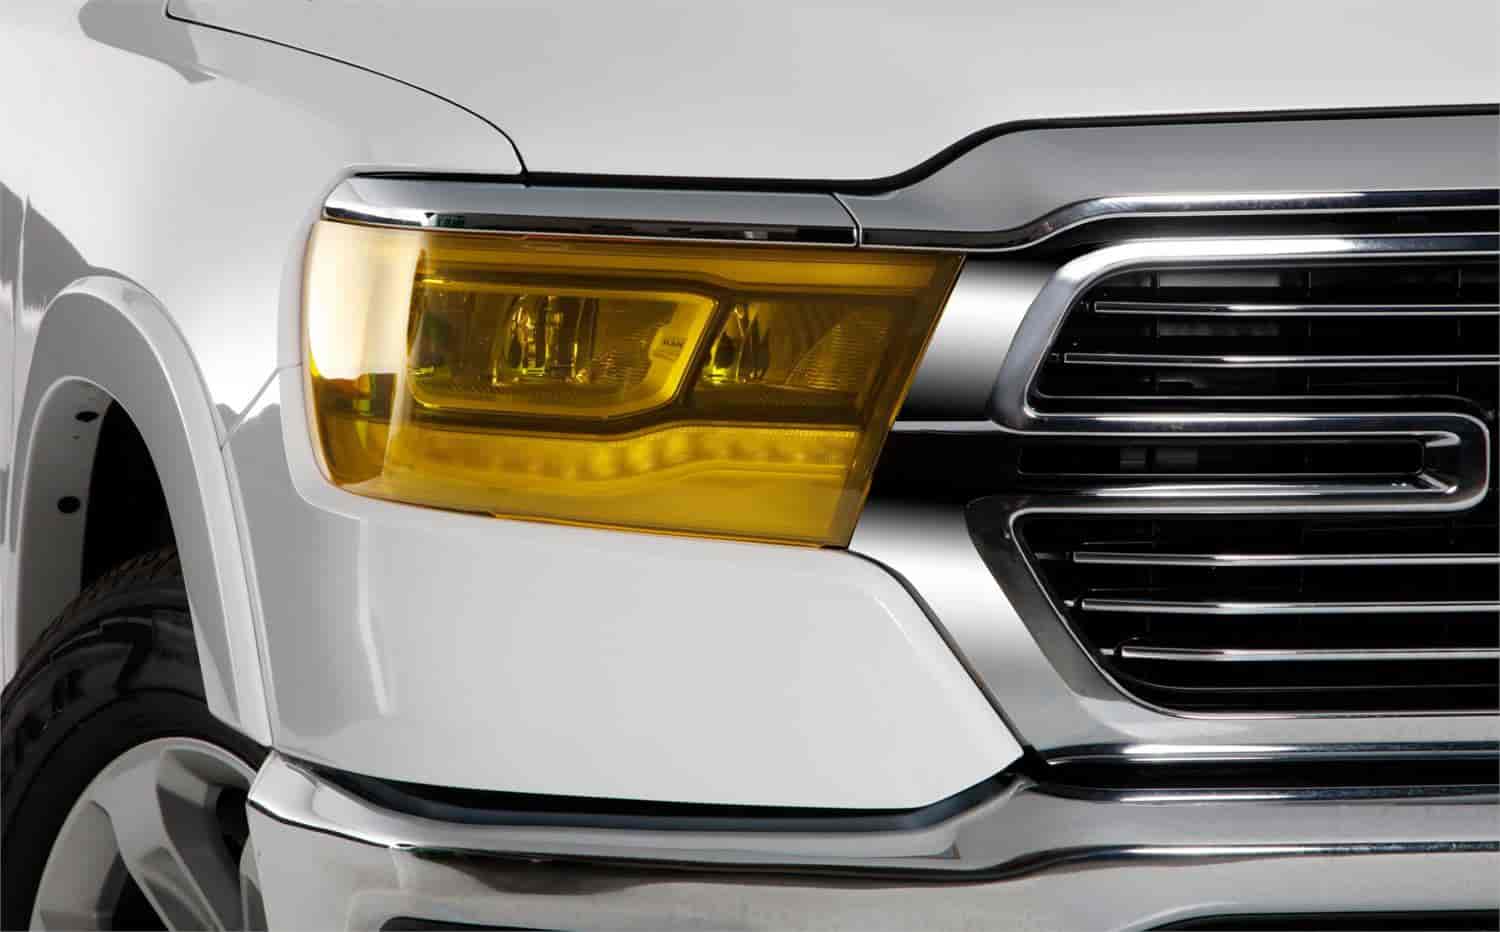 Transparent Yellow Headlight Covers For Select Late-Model Dodge Ram 1500 Trucks